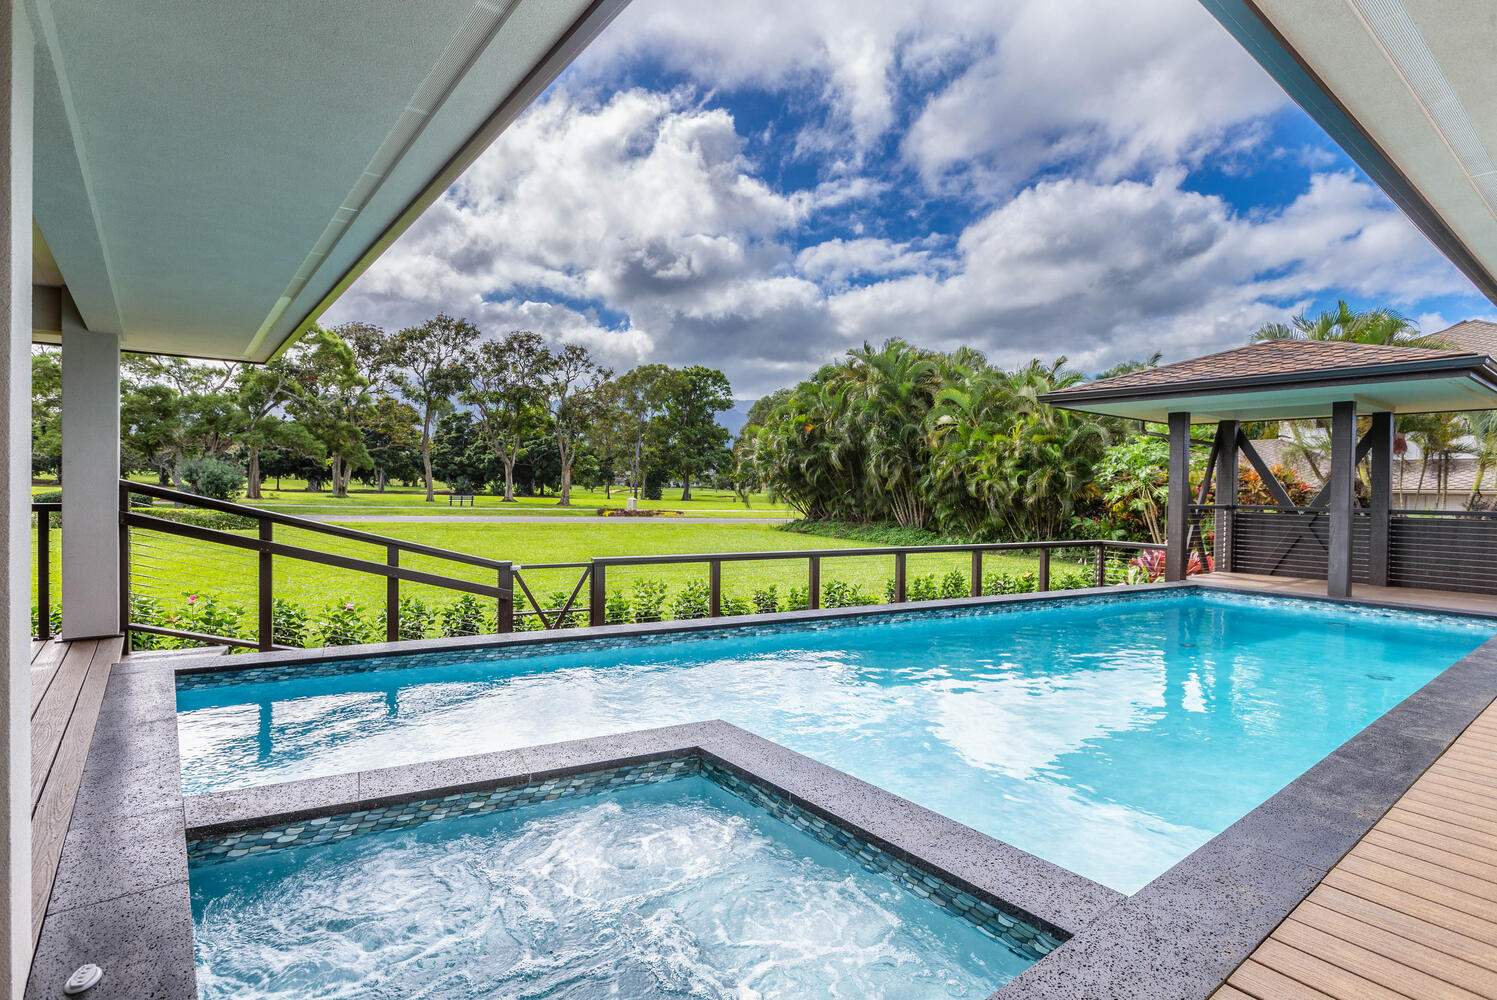 Relax in the amazing Pool Area with Hot Tub